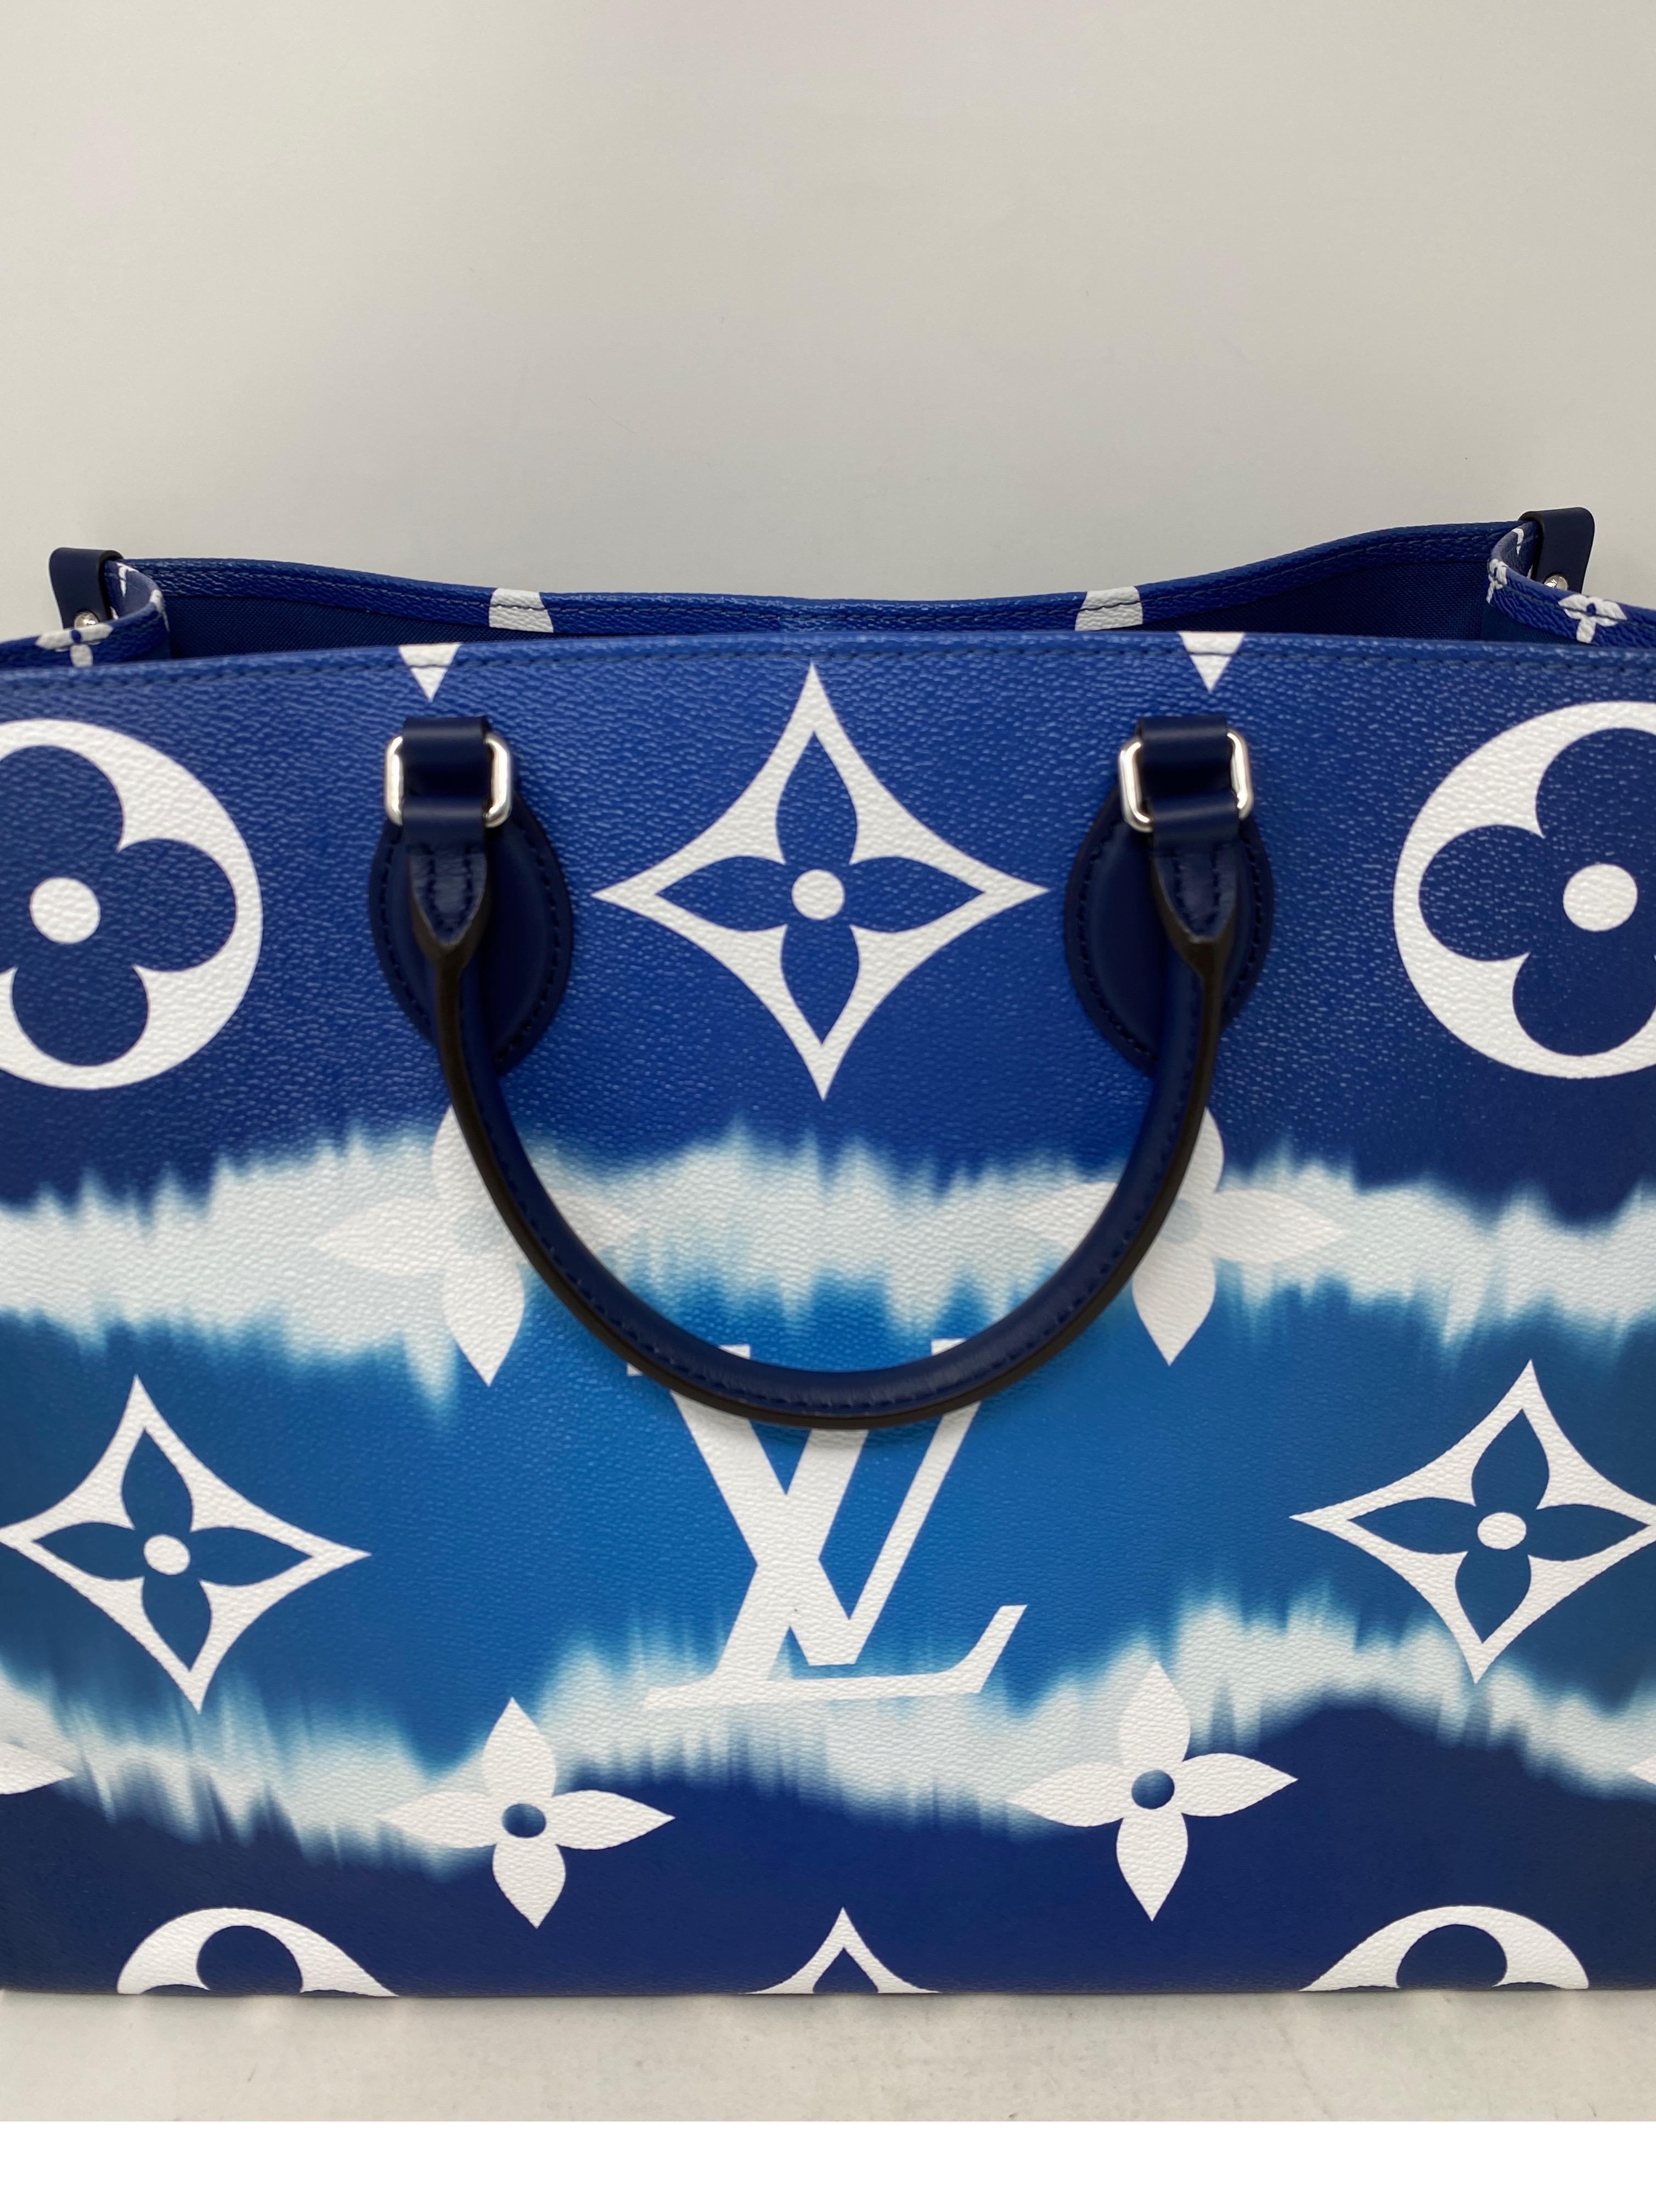 Louis Vuitton Blue On The Go Escale Tote Bag. Excellent condition. Limited and rare collector's piece. Can be worn 2 ways with 2 size handles. Guaranteed authentic. 